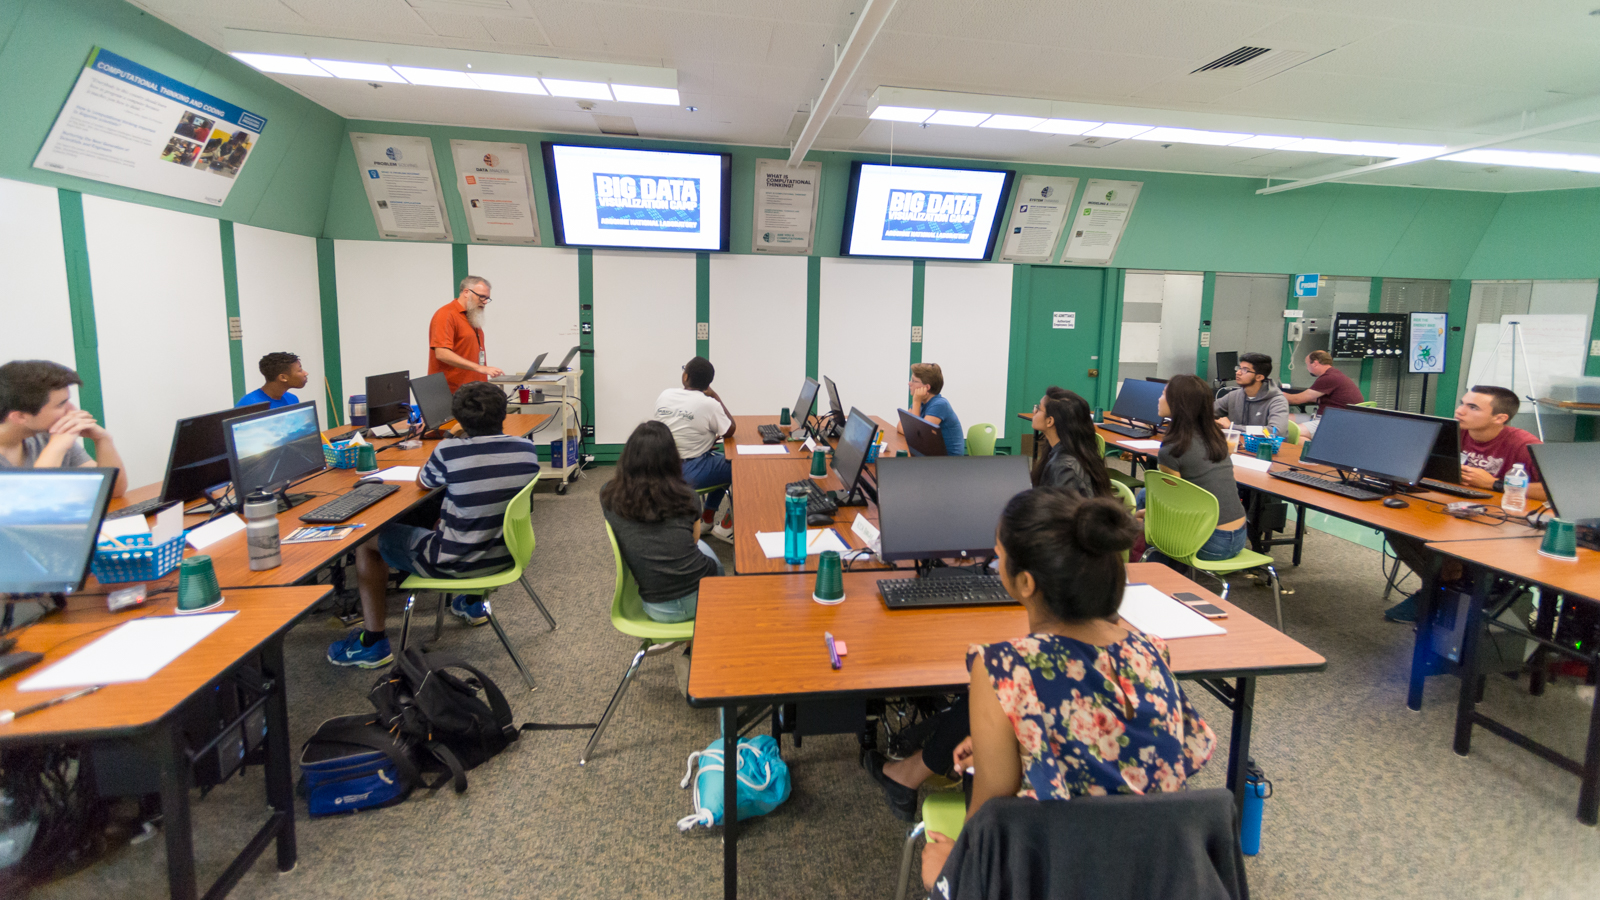 Michael Papka (left) help lead Argonne’s first Big Data and Visualization Camp over the summer. He taught these high schoolers the importance of extracting useful information from an increasingly vast sea of numerical data. (Image by Argonne National Laboratory.)